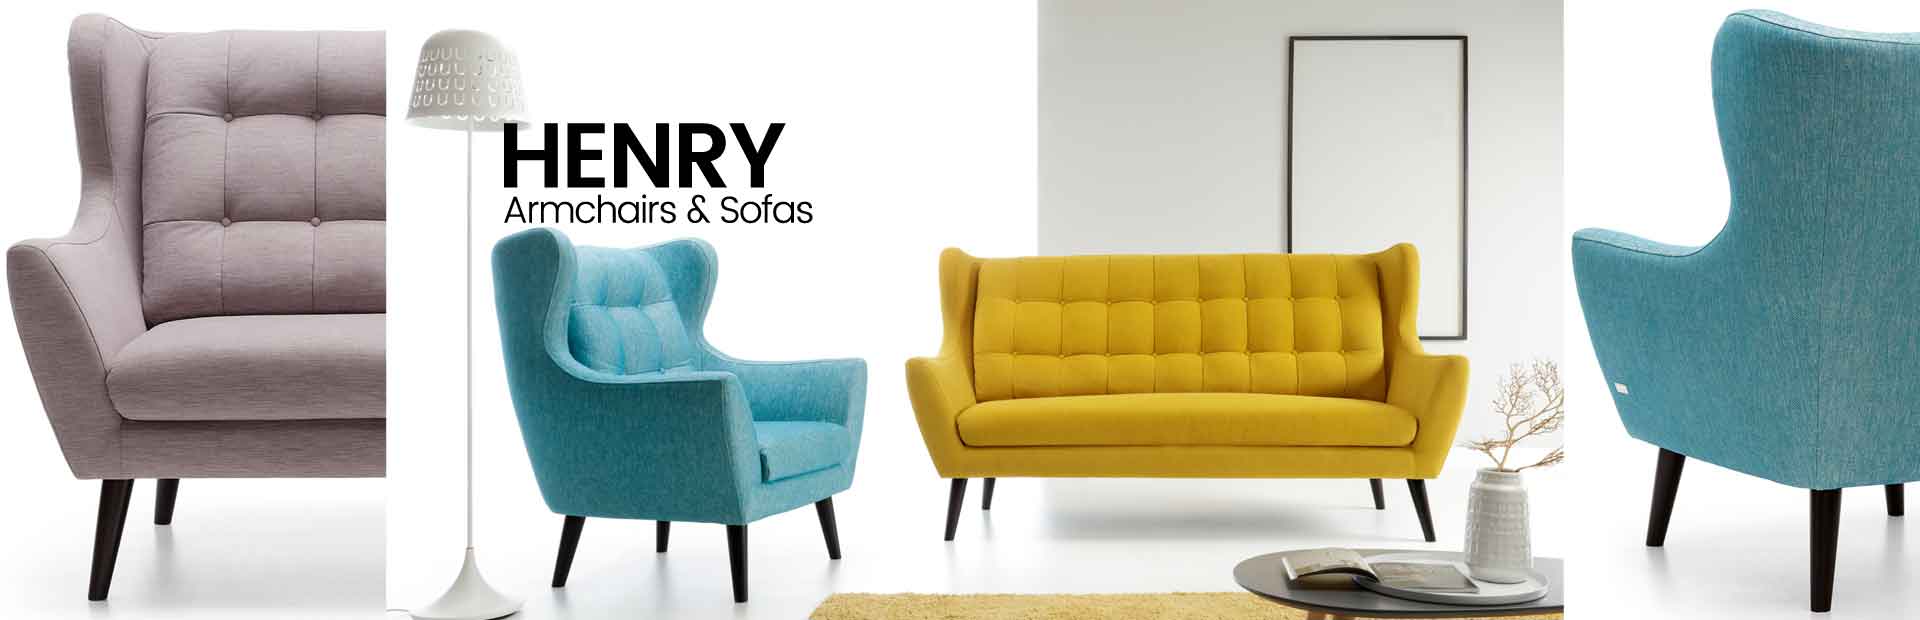 armchairs & sofas Henry